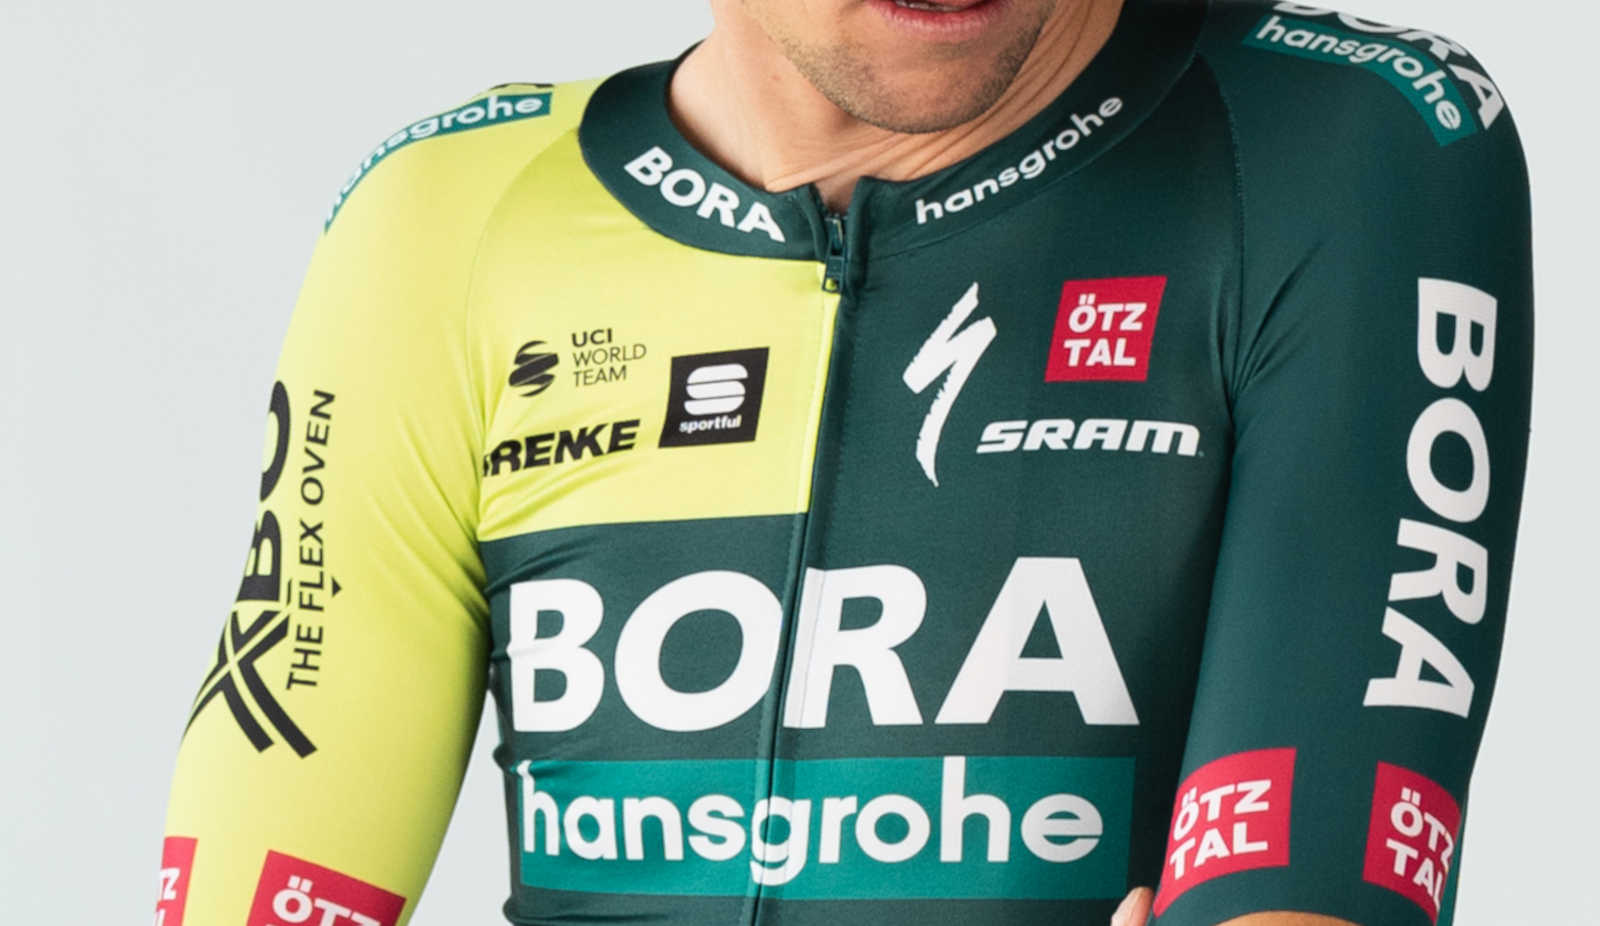 Bora – hansgrohe reveals new kit (that doesn’t look like the TdF Green jersey anymore)